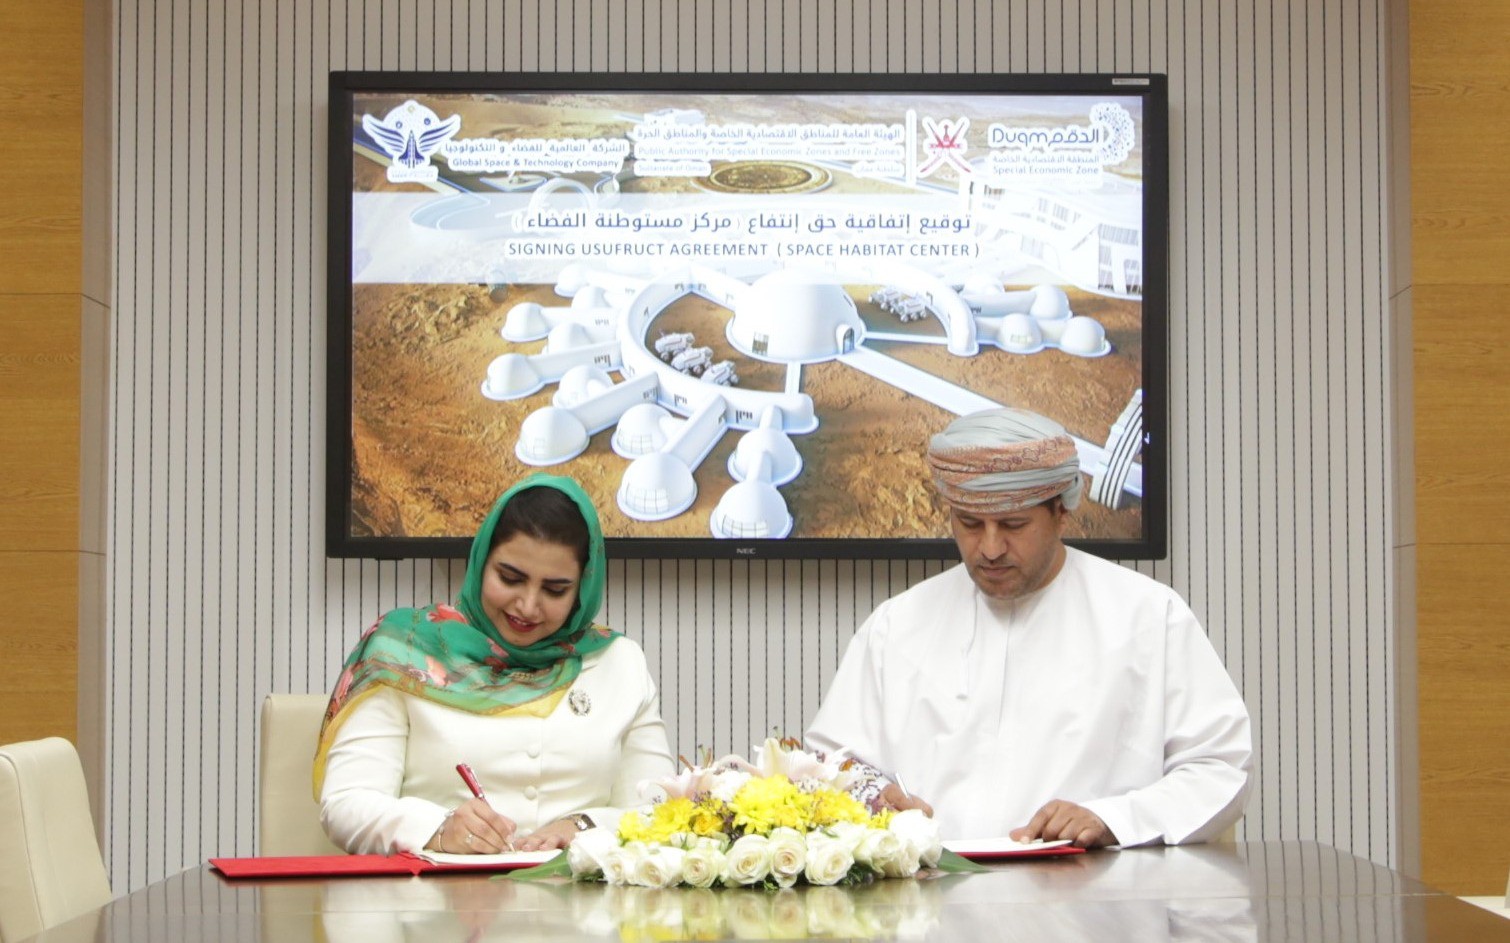 Signing land usufruct agreement to establish space settlement centre in Duqm